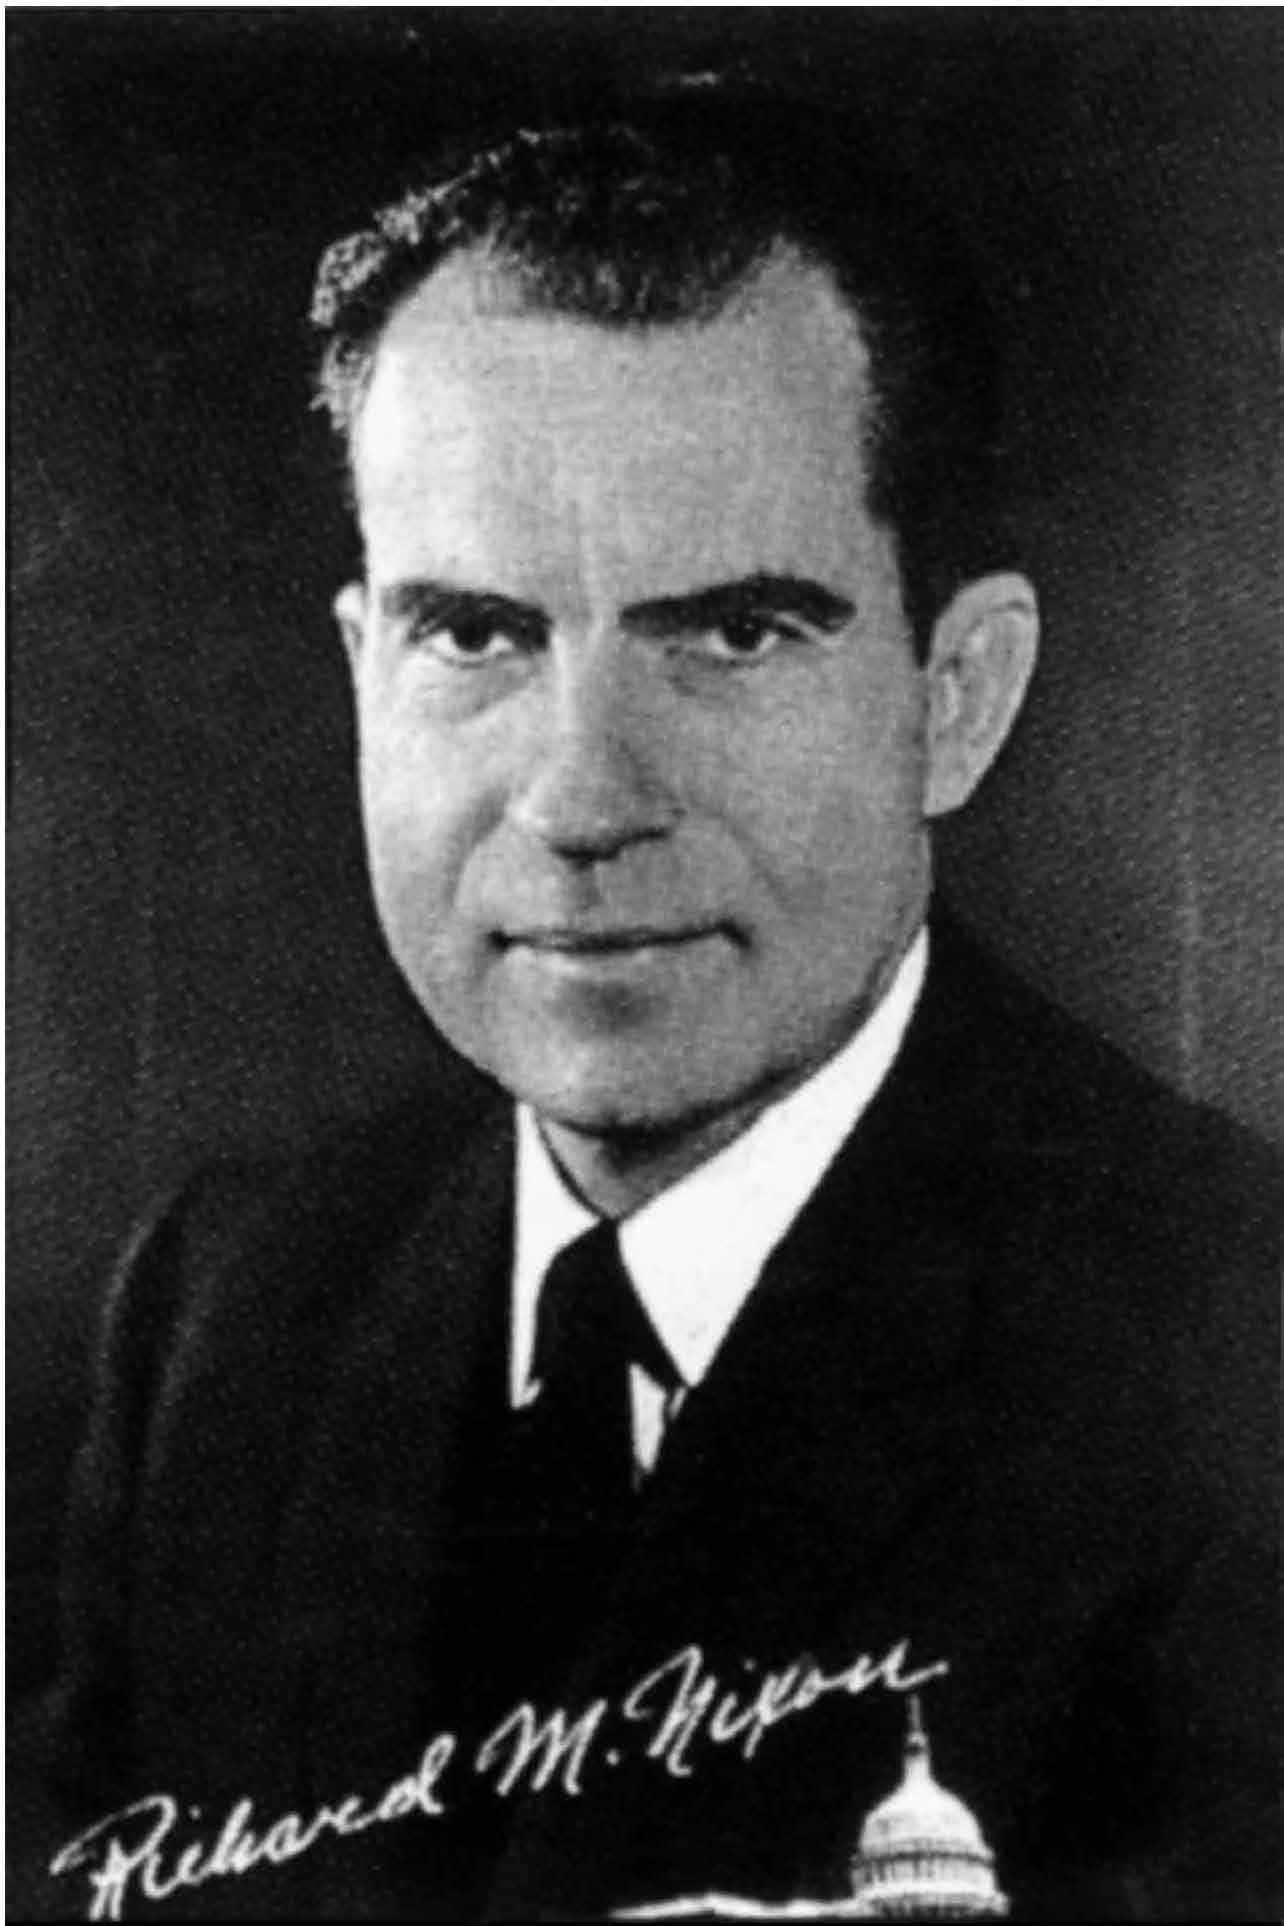 portrait of Nixon and link to PDF copy of ad